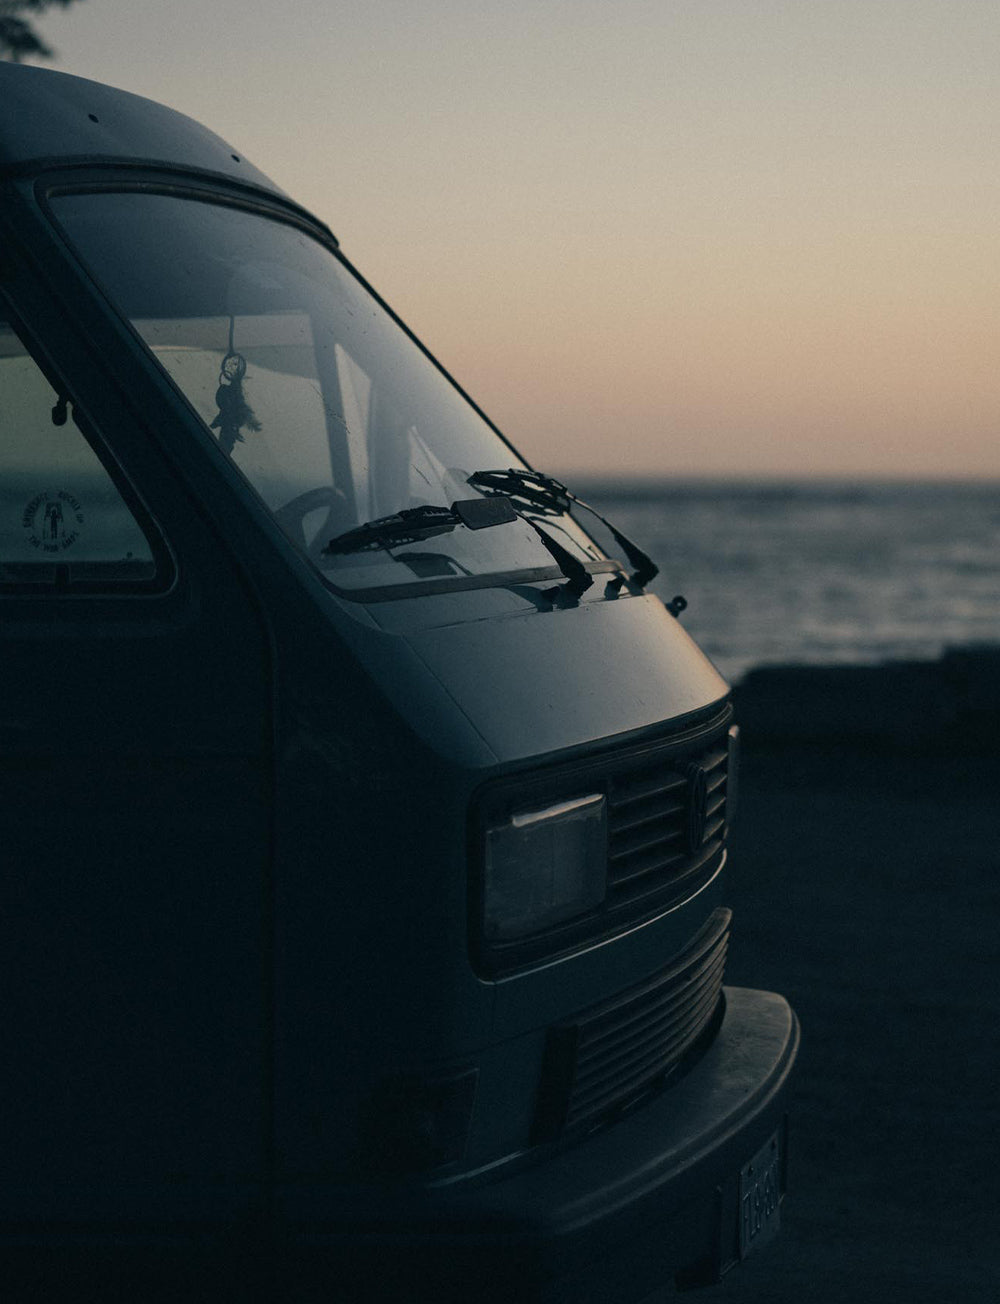 The sunset reflects off the windscreen and bonnet of the classic VW Westy